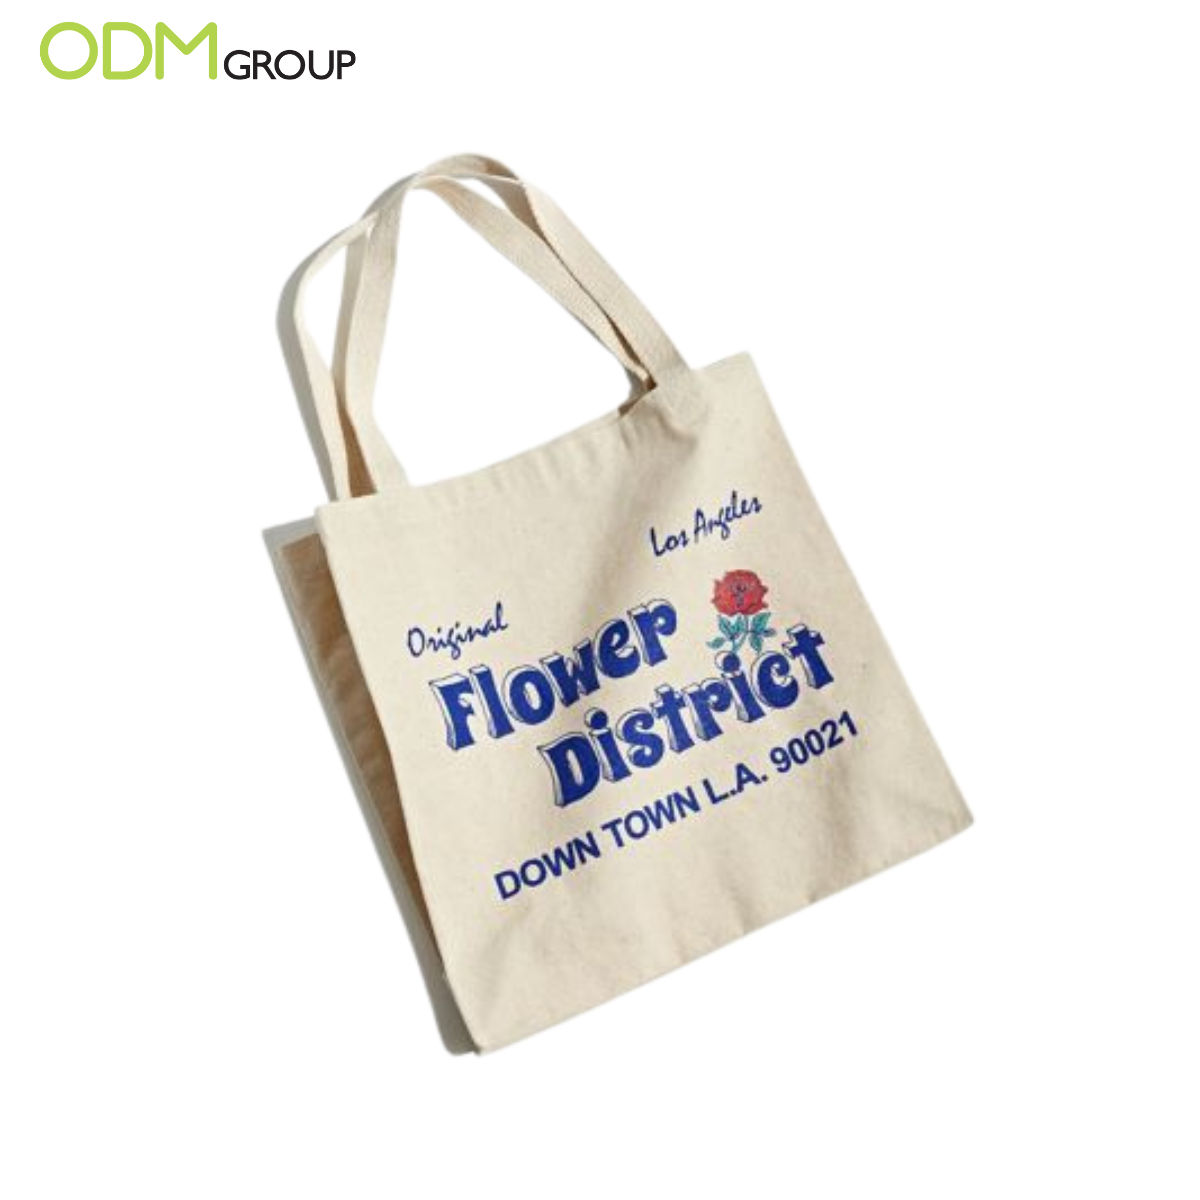 Customizable tote bag with motivational quote.